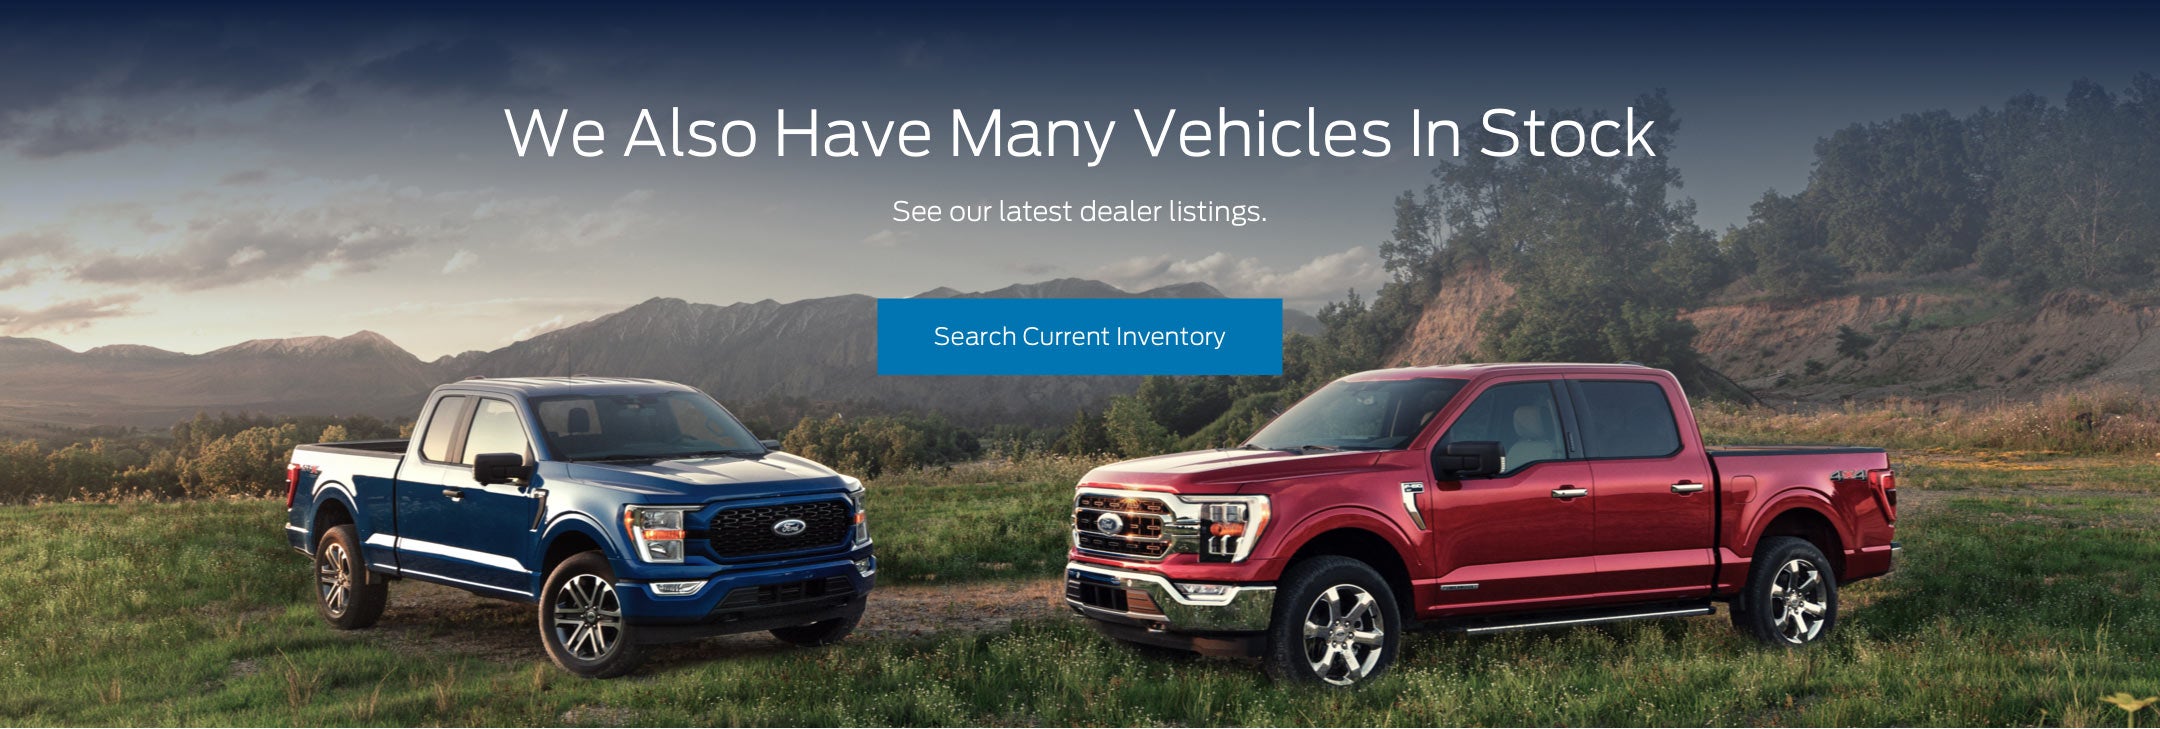 Ford vehicles in stock | Johnson Ford in Pittsfield MA